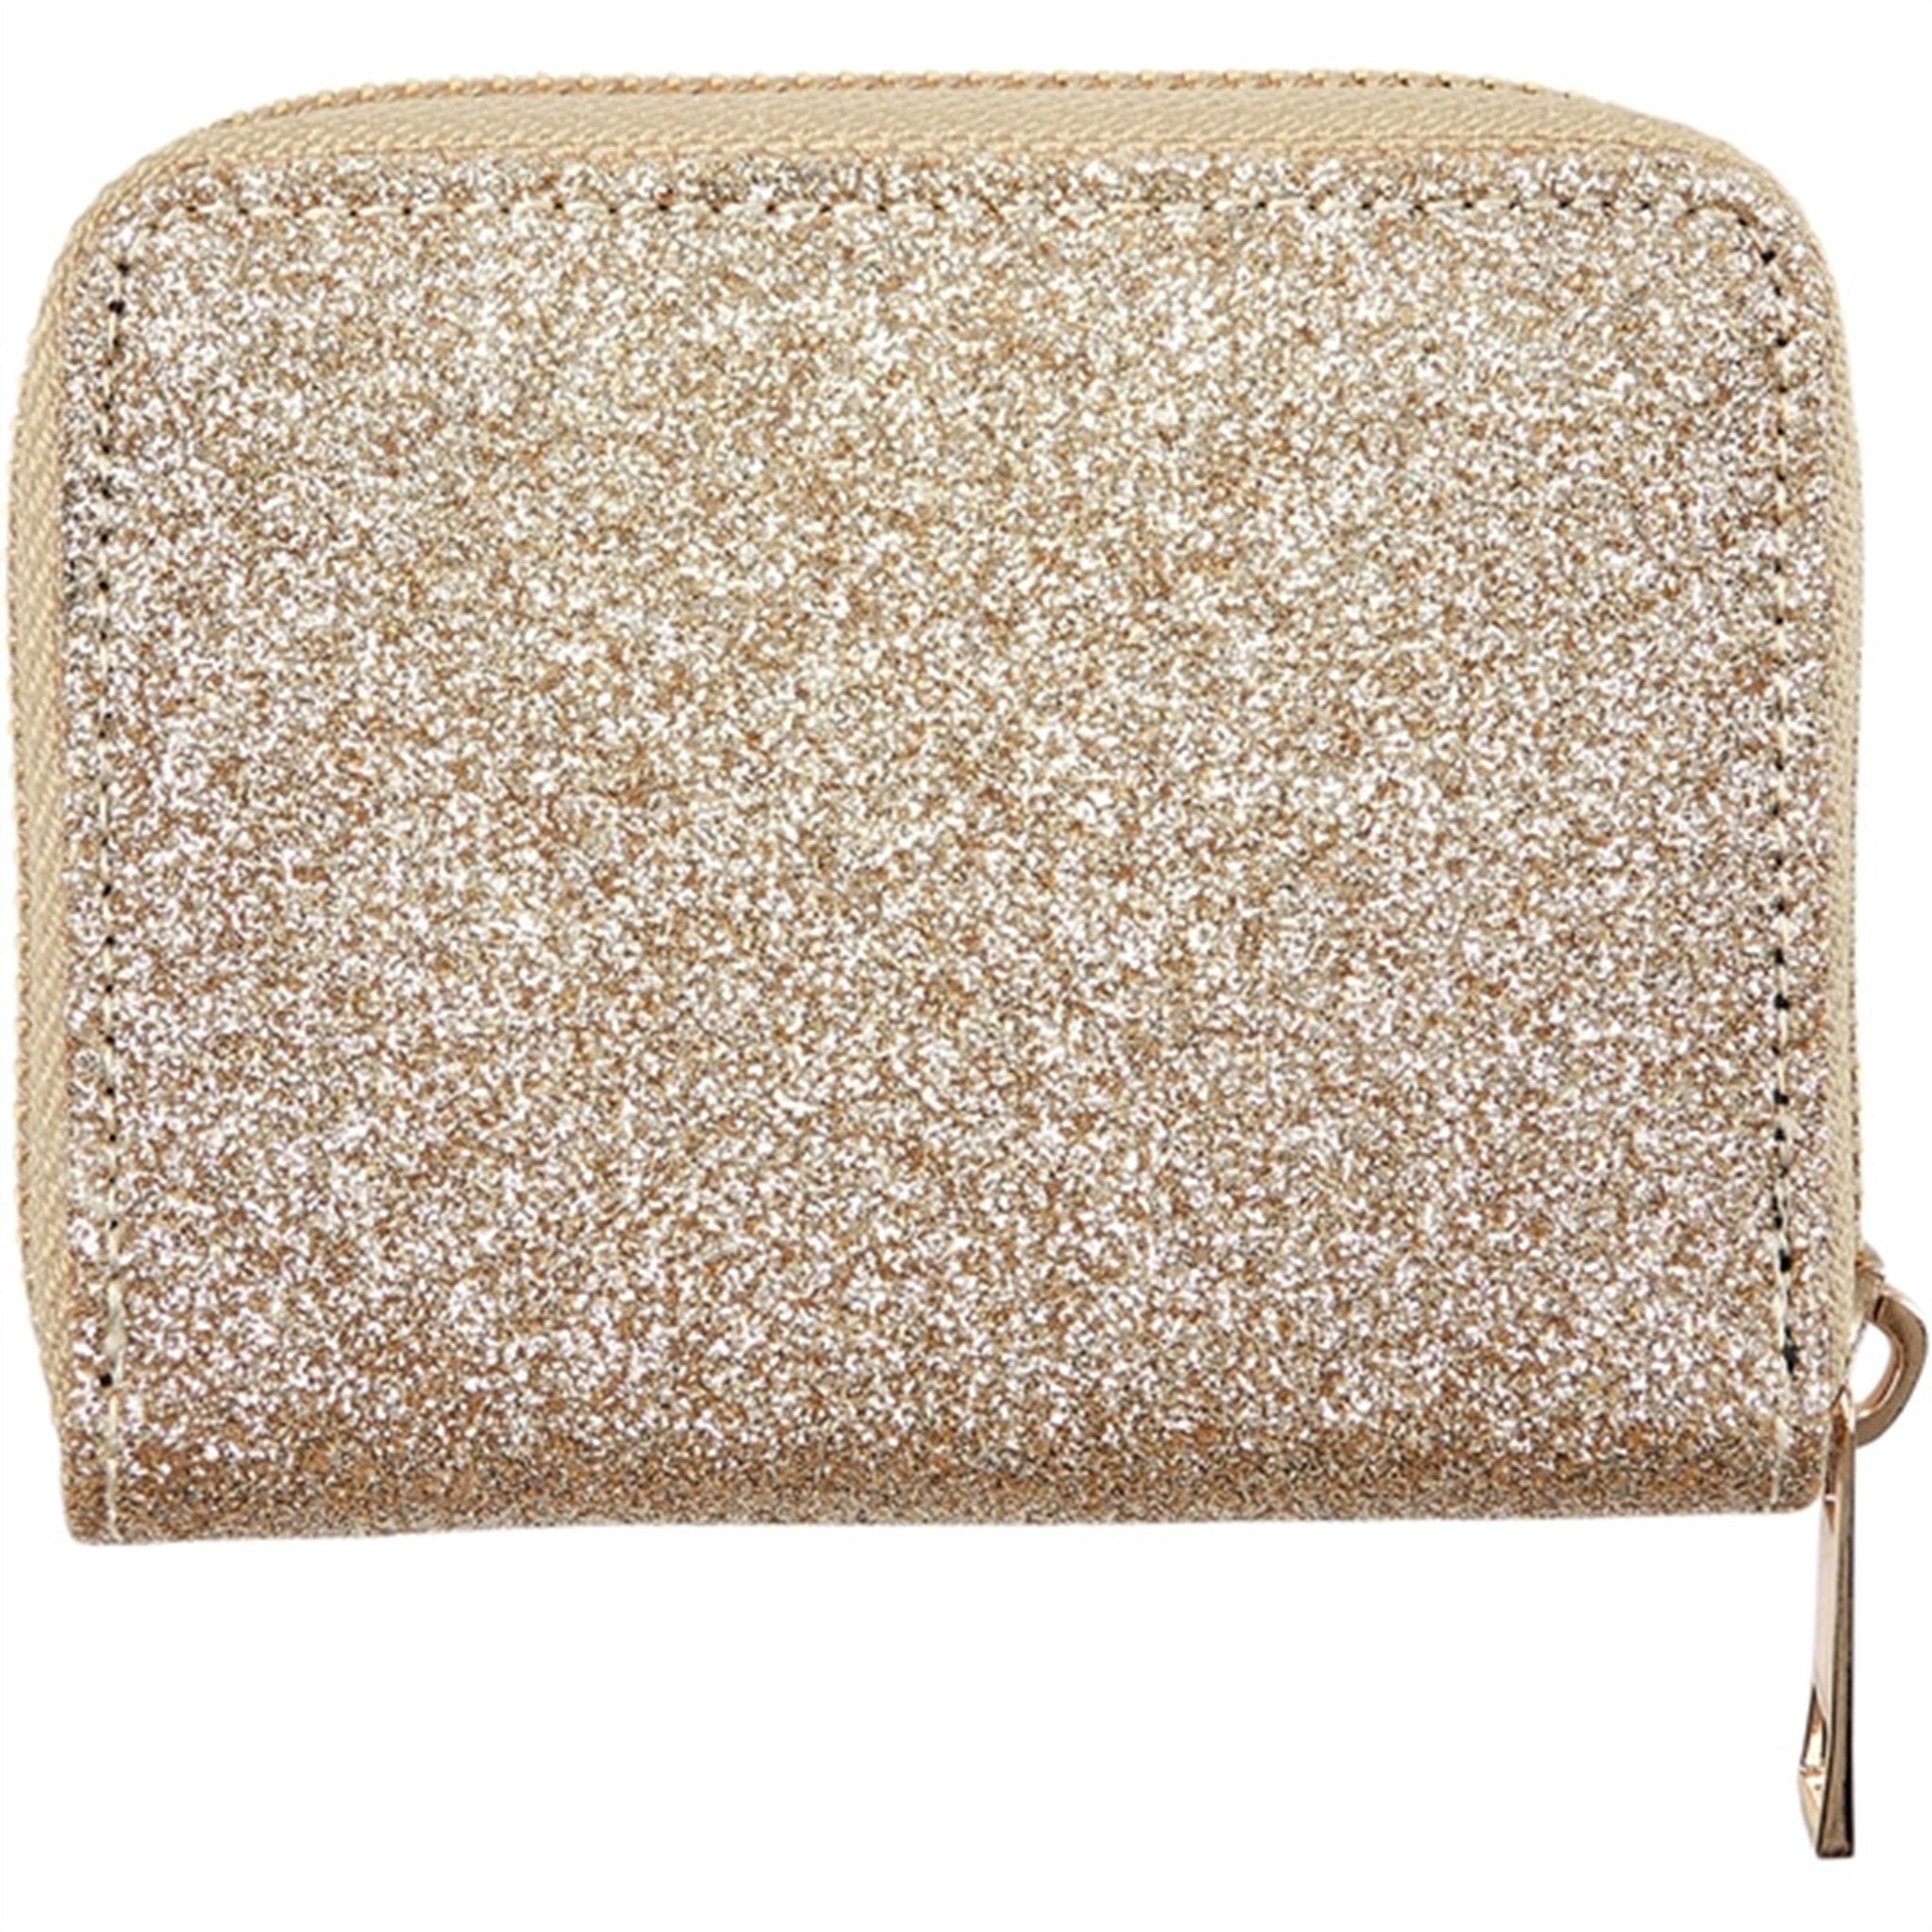 Petit By Sofie Schnoor Champagne Wallet 6